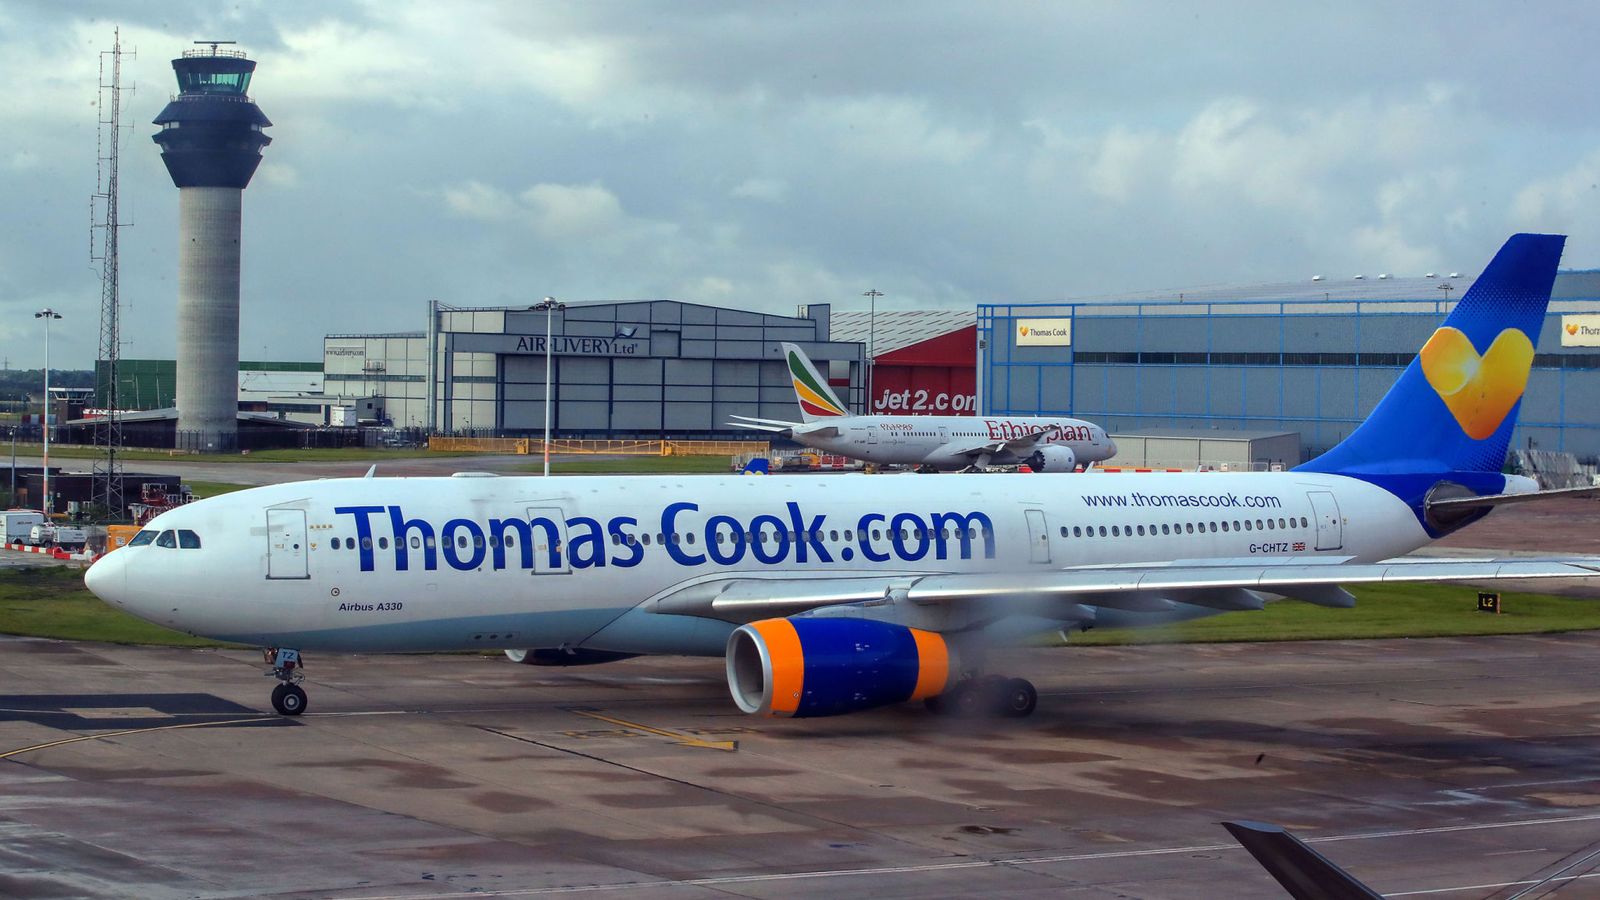 UPDATE 2-Reprieve for Thomas Cook's UK stores as Hays Travel deal saves up to 2,500 jobs